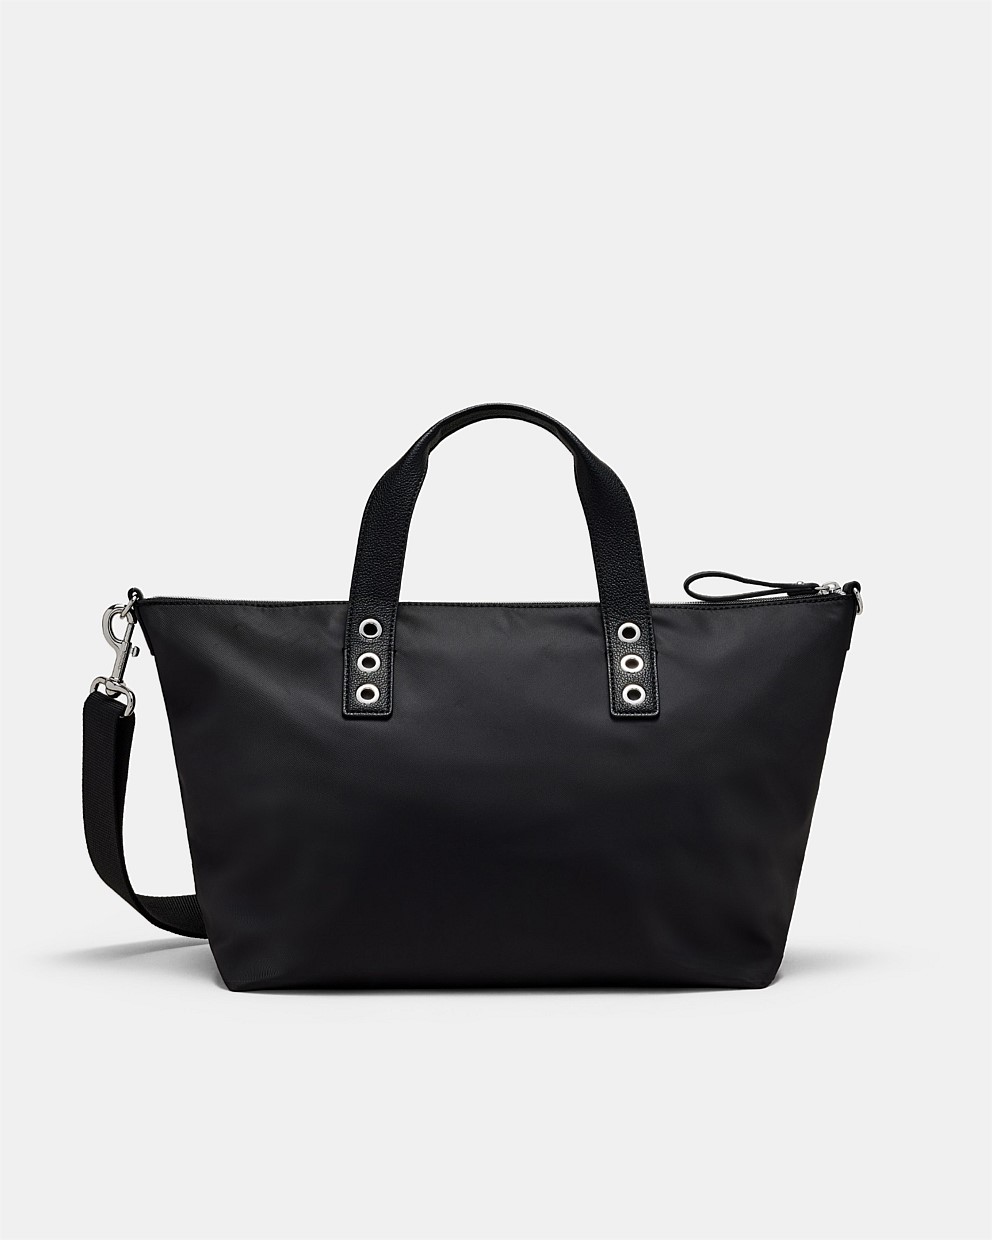 Black Silver Elements Tote Bag - Bags | Mimco